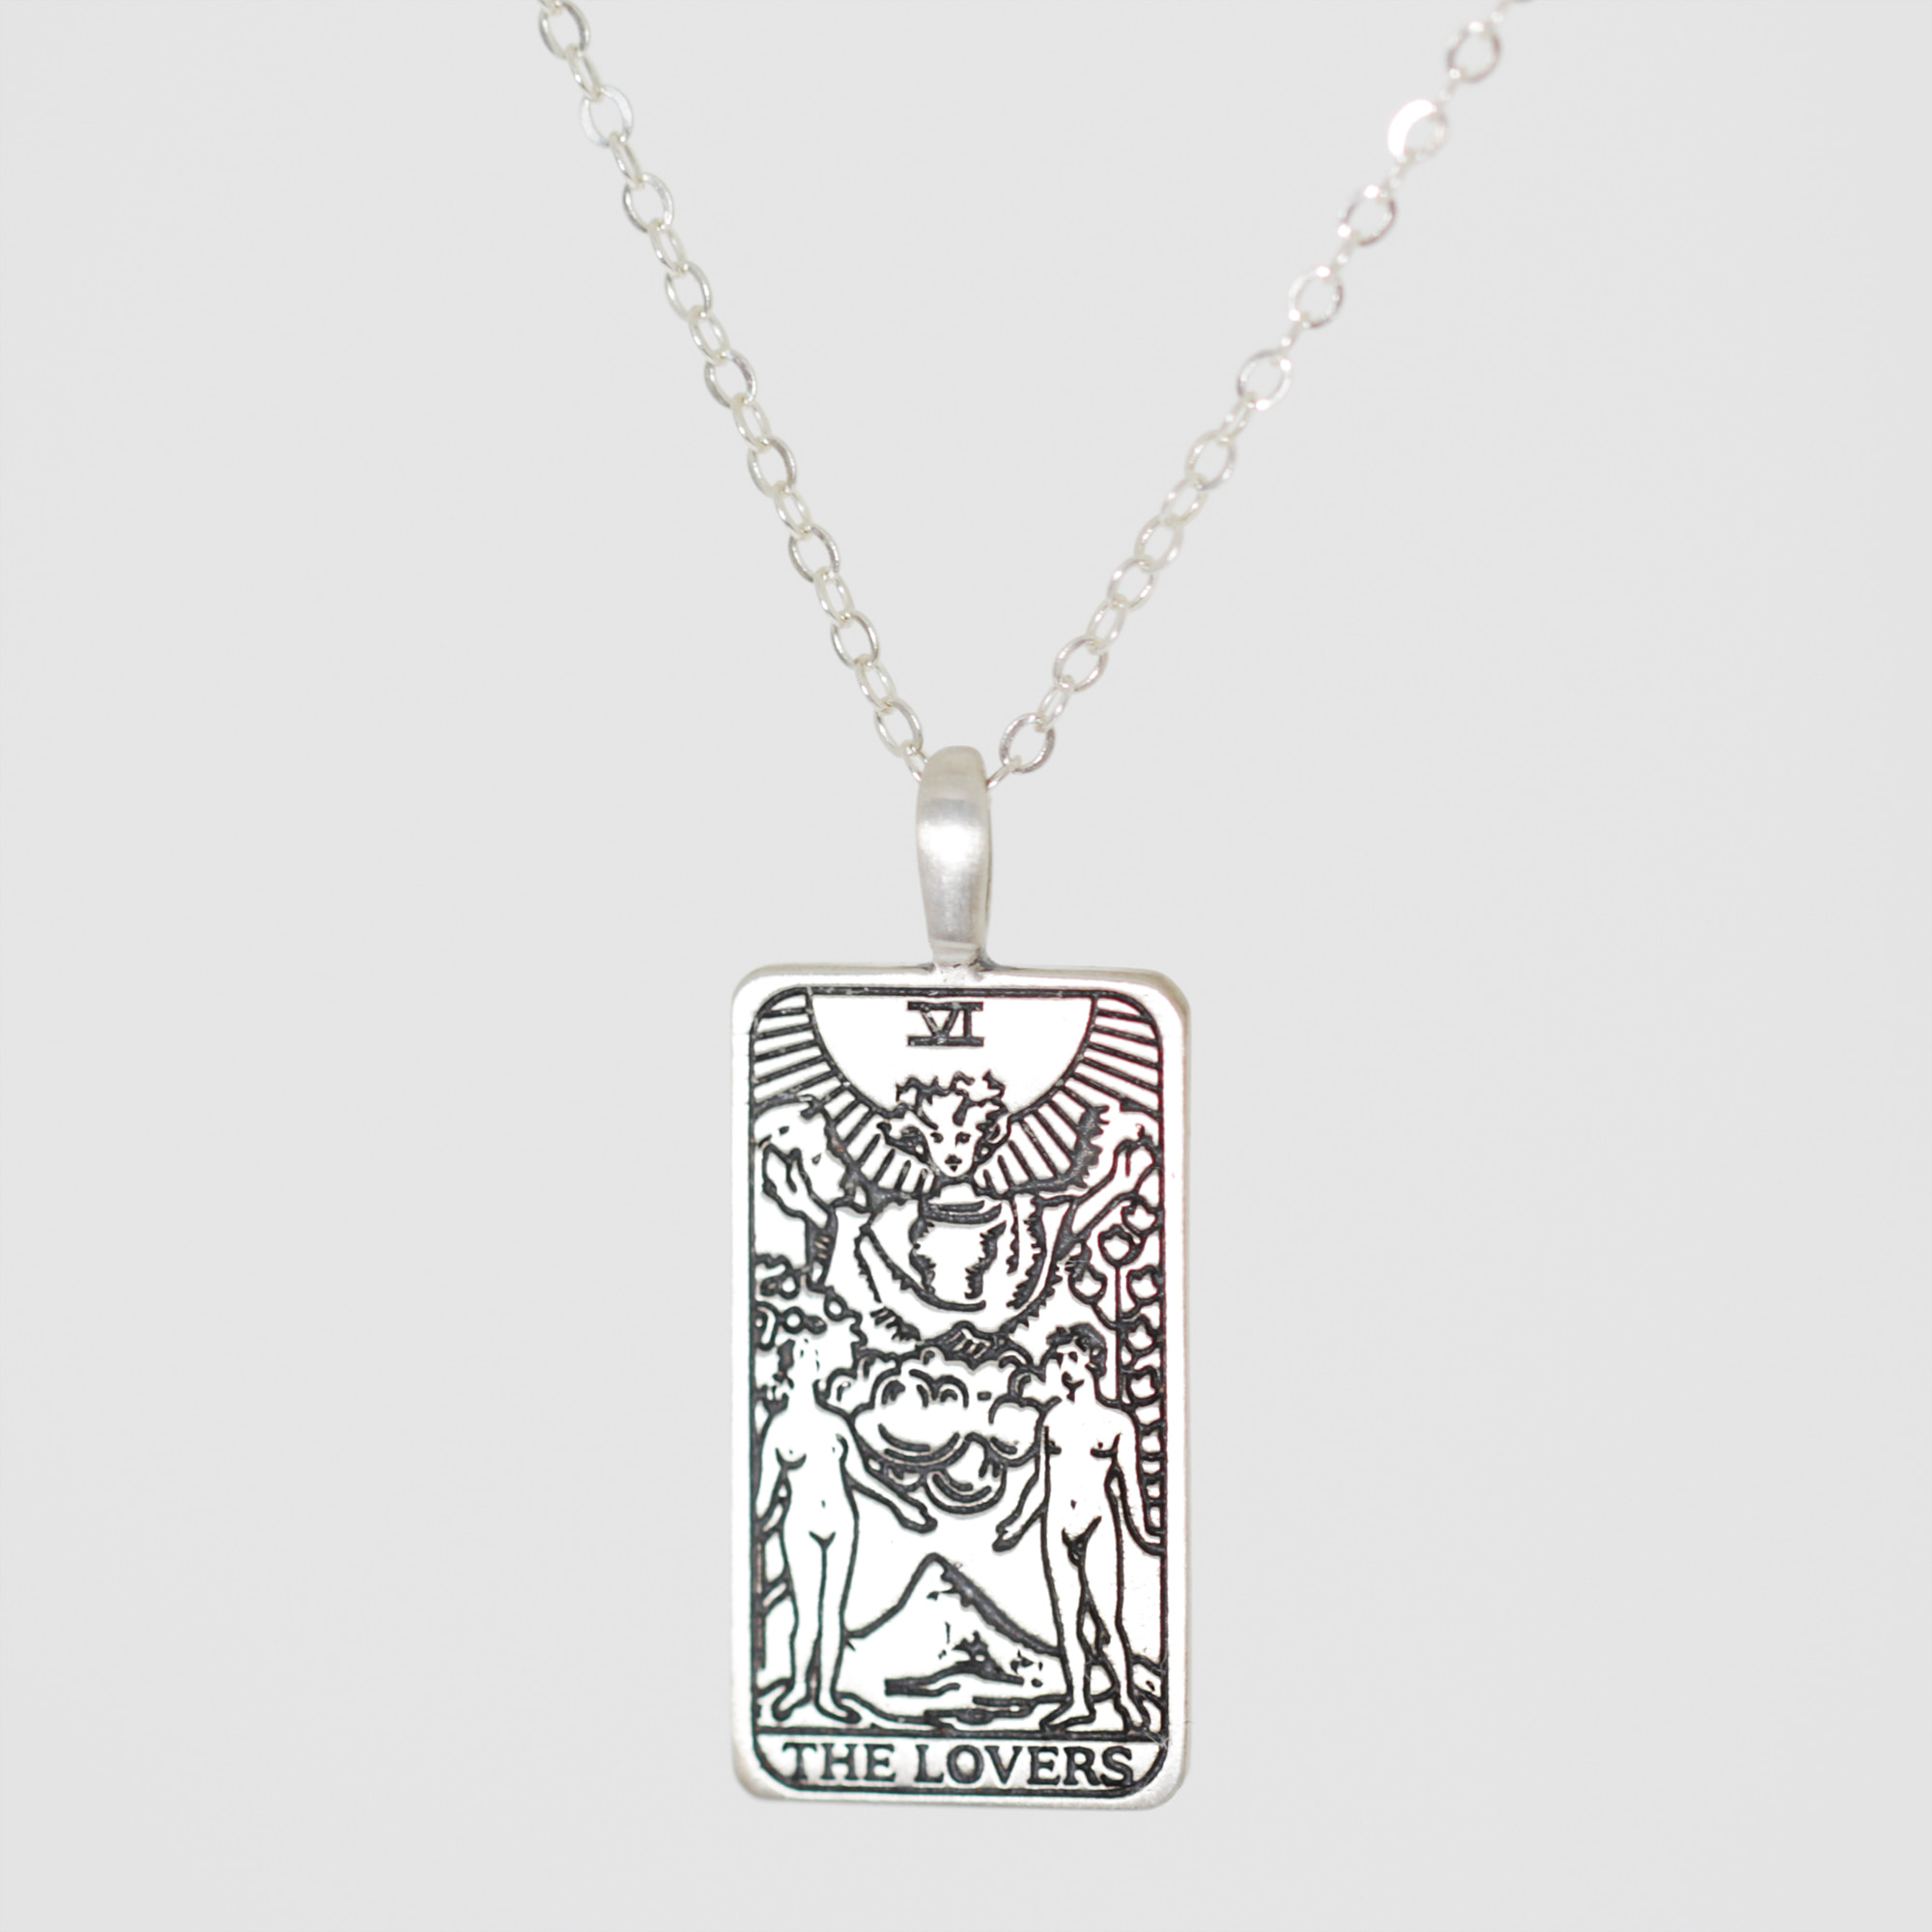 The lovers tarot necklace